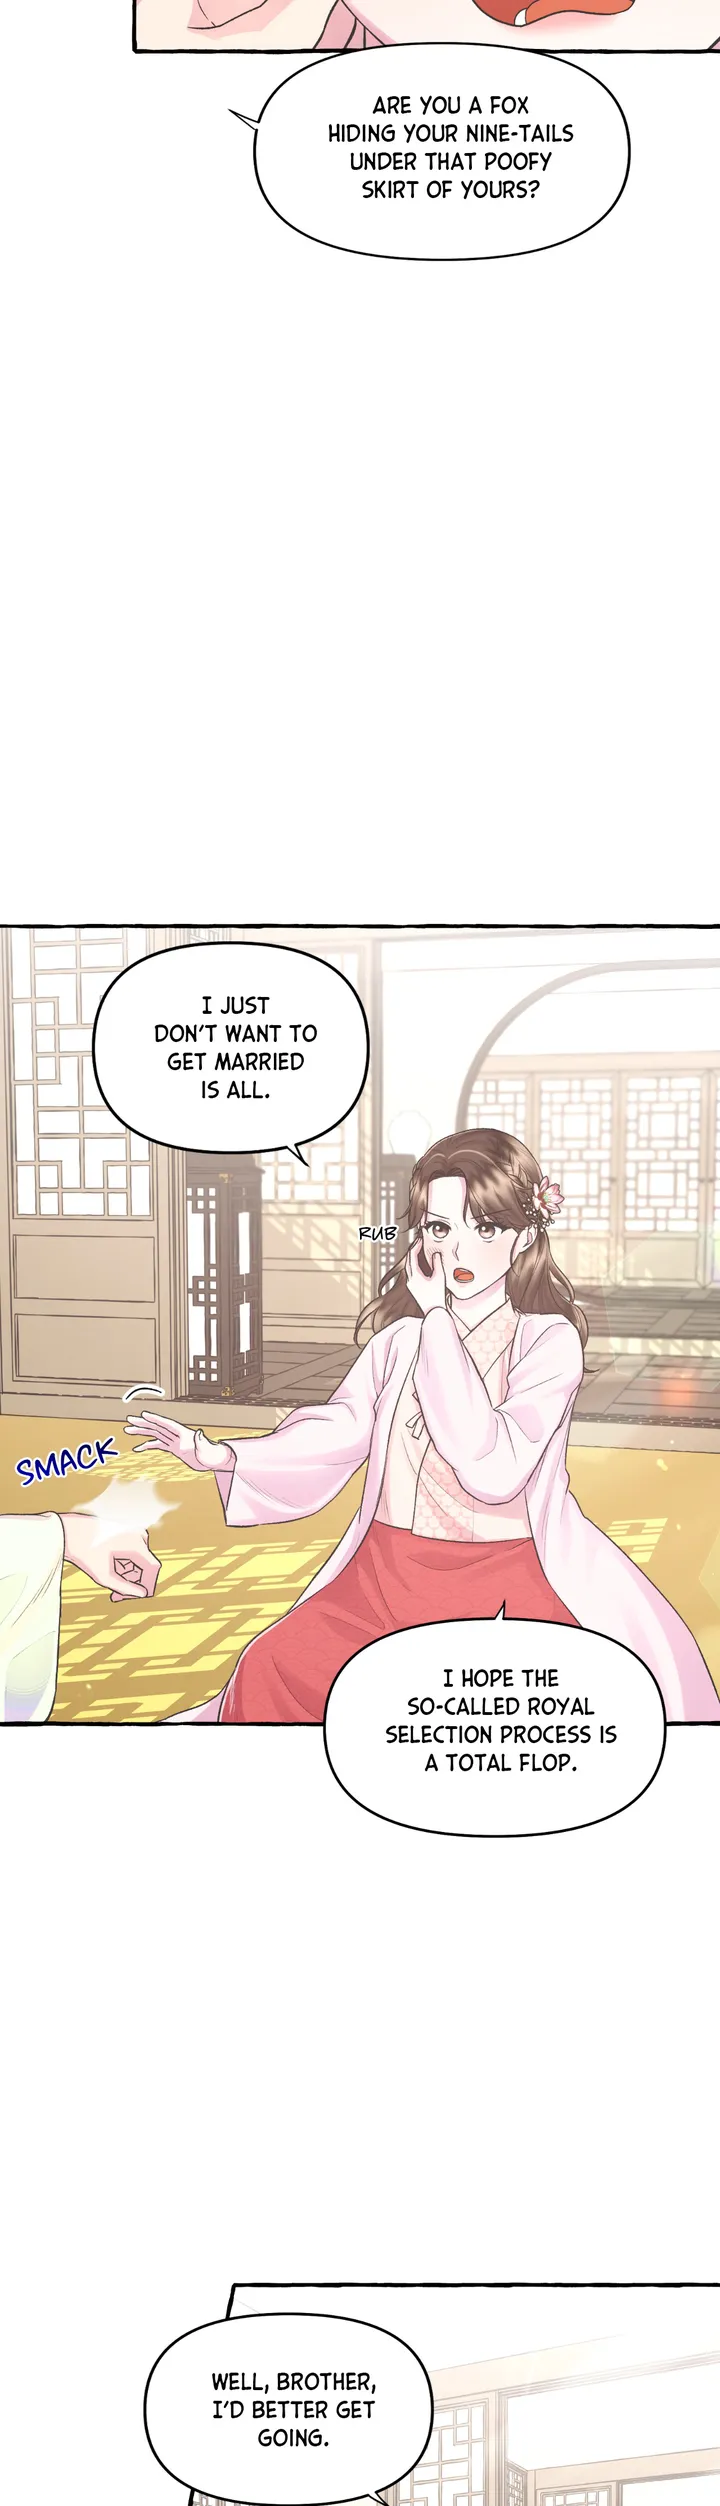 Cheer Up, Your Highness! chapter 2